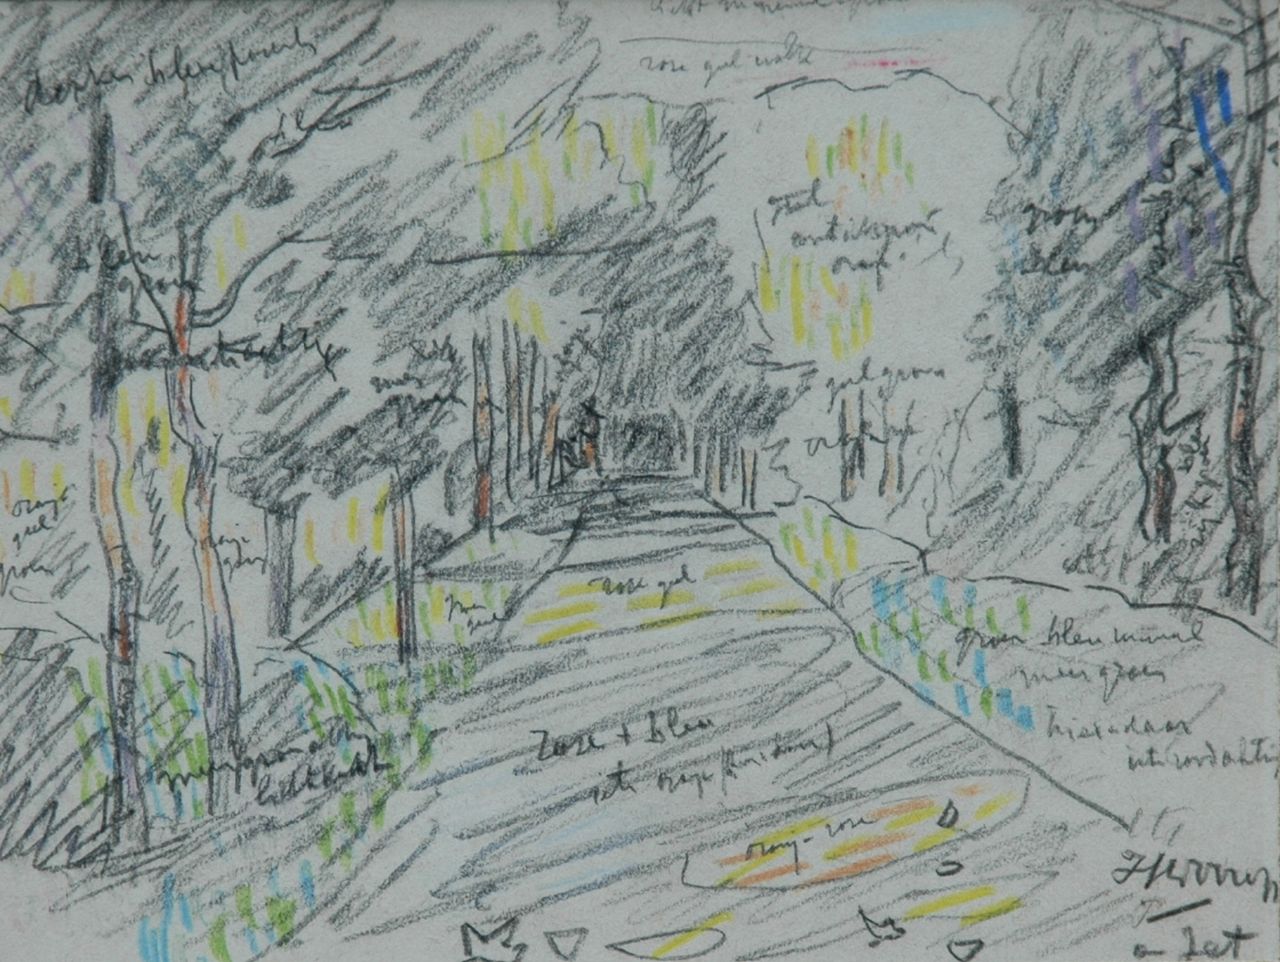 Toorop J.Th.  | Johannes Theodorus 'Jan' Toorop, Study of a country lane, with color indications, pencil and pastel on paper 11.1 x 14.7 cm, signed l.r.